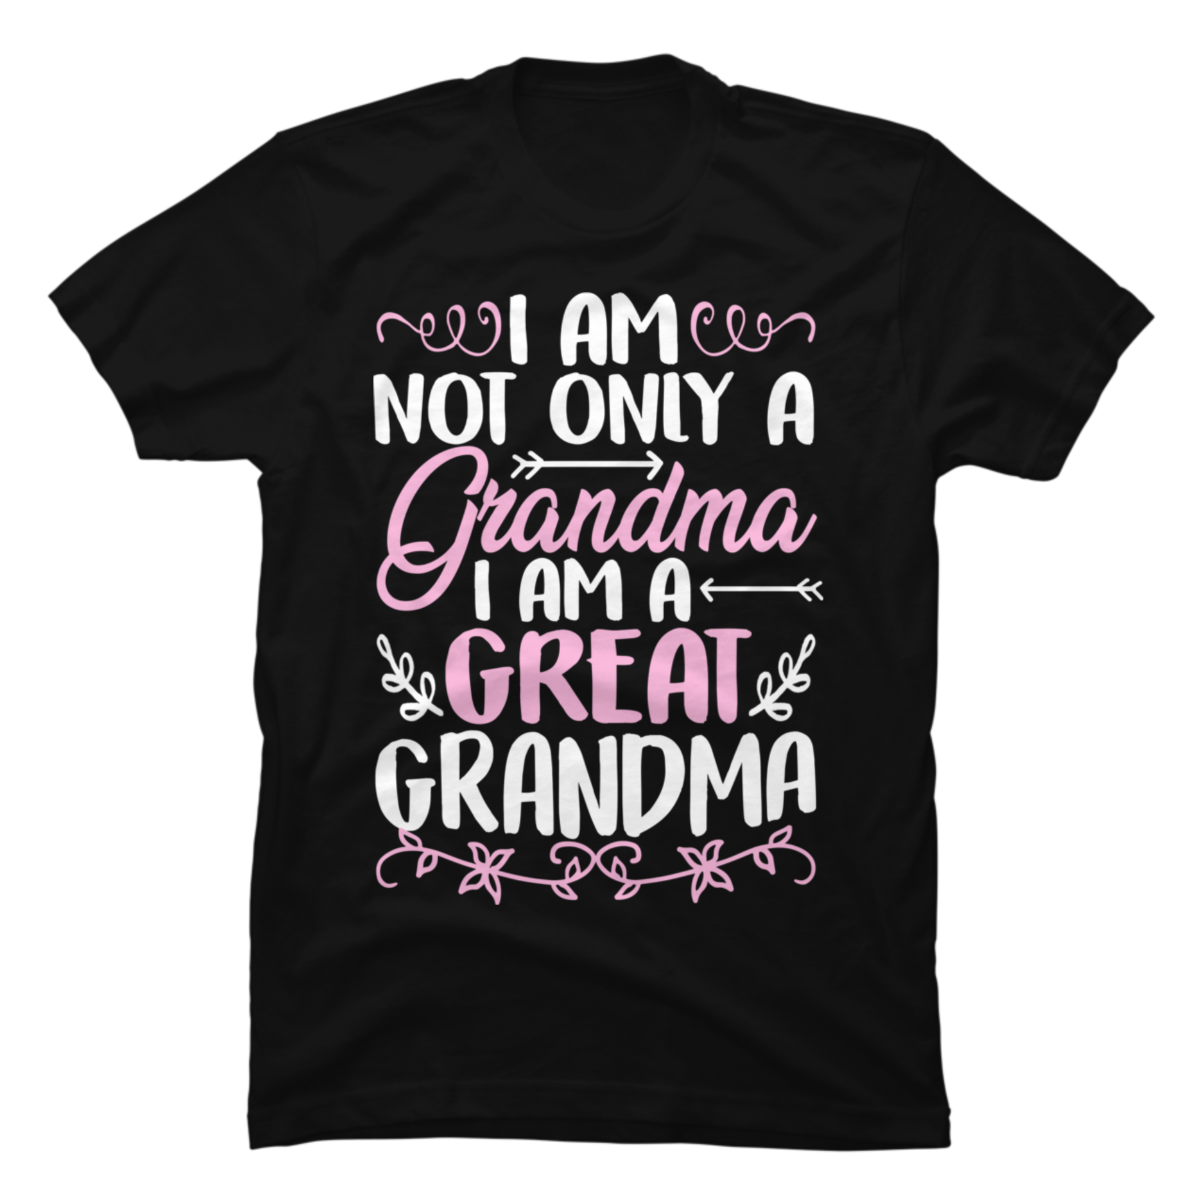 Great Grandma Grandmother Mother's Day Funny Gift - Buy t-shirt designs